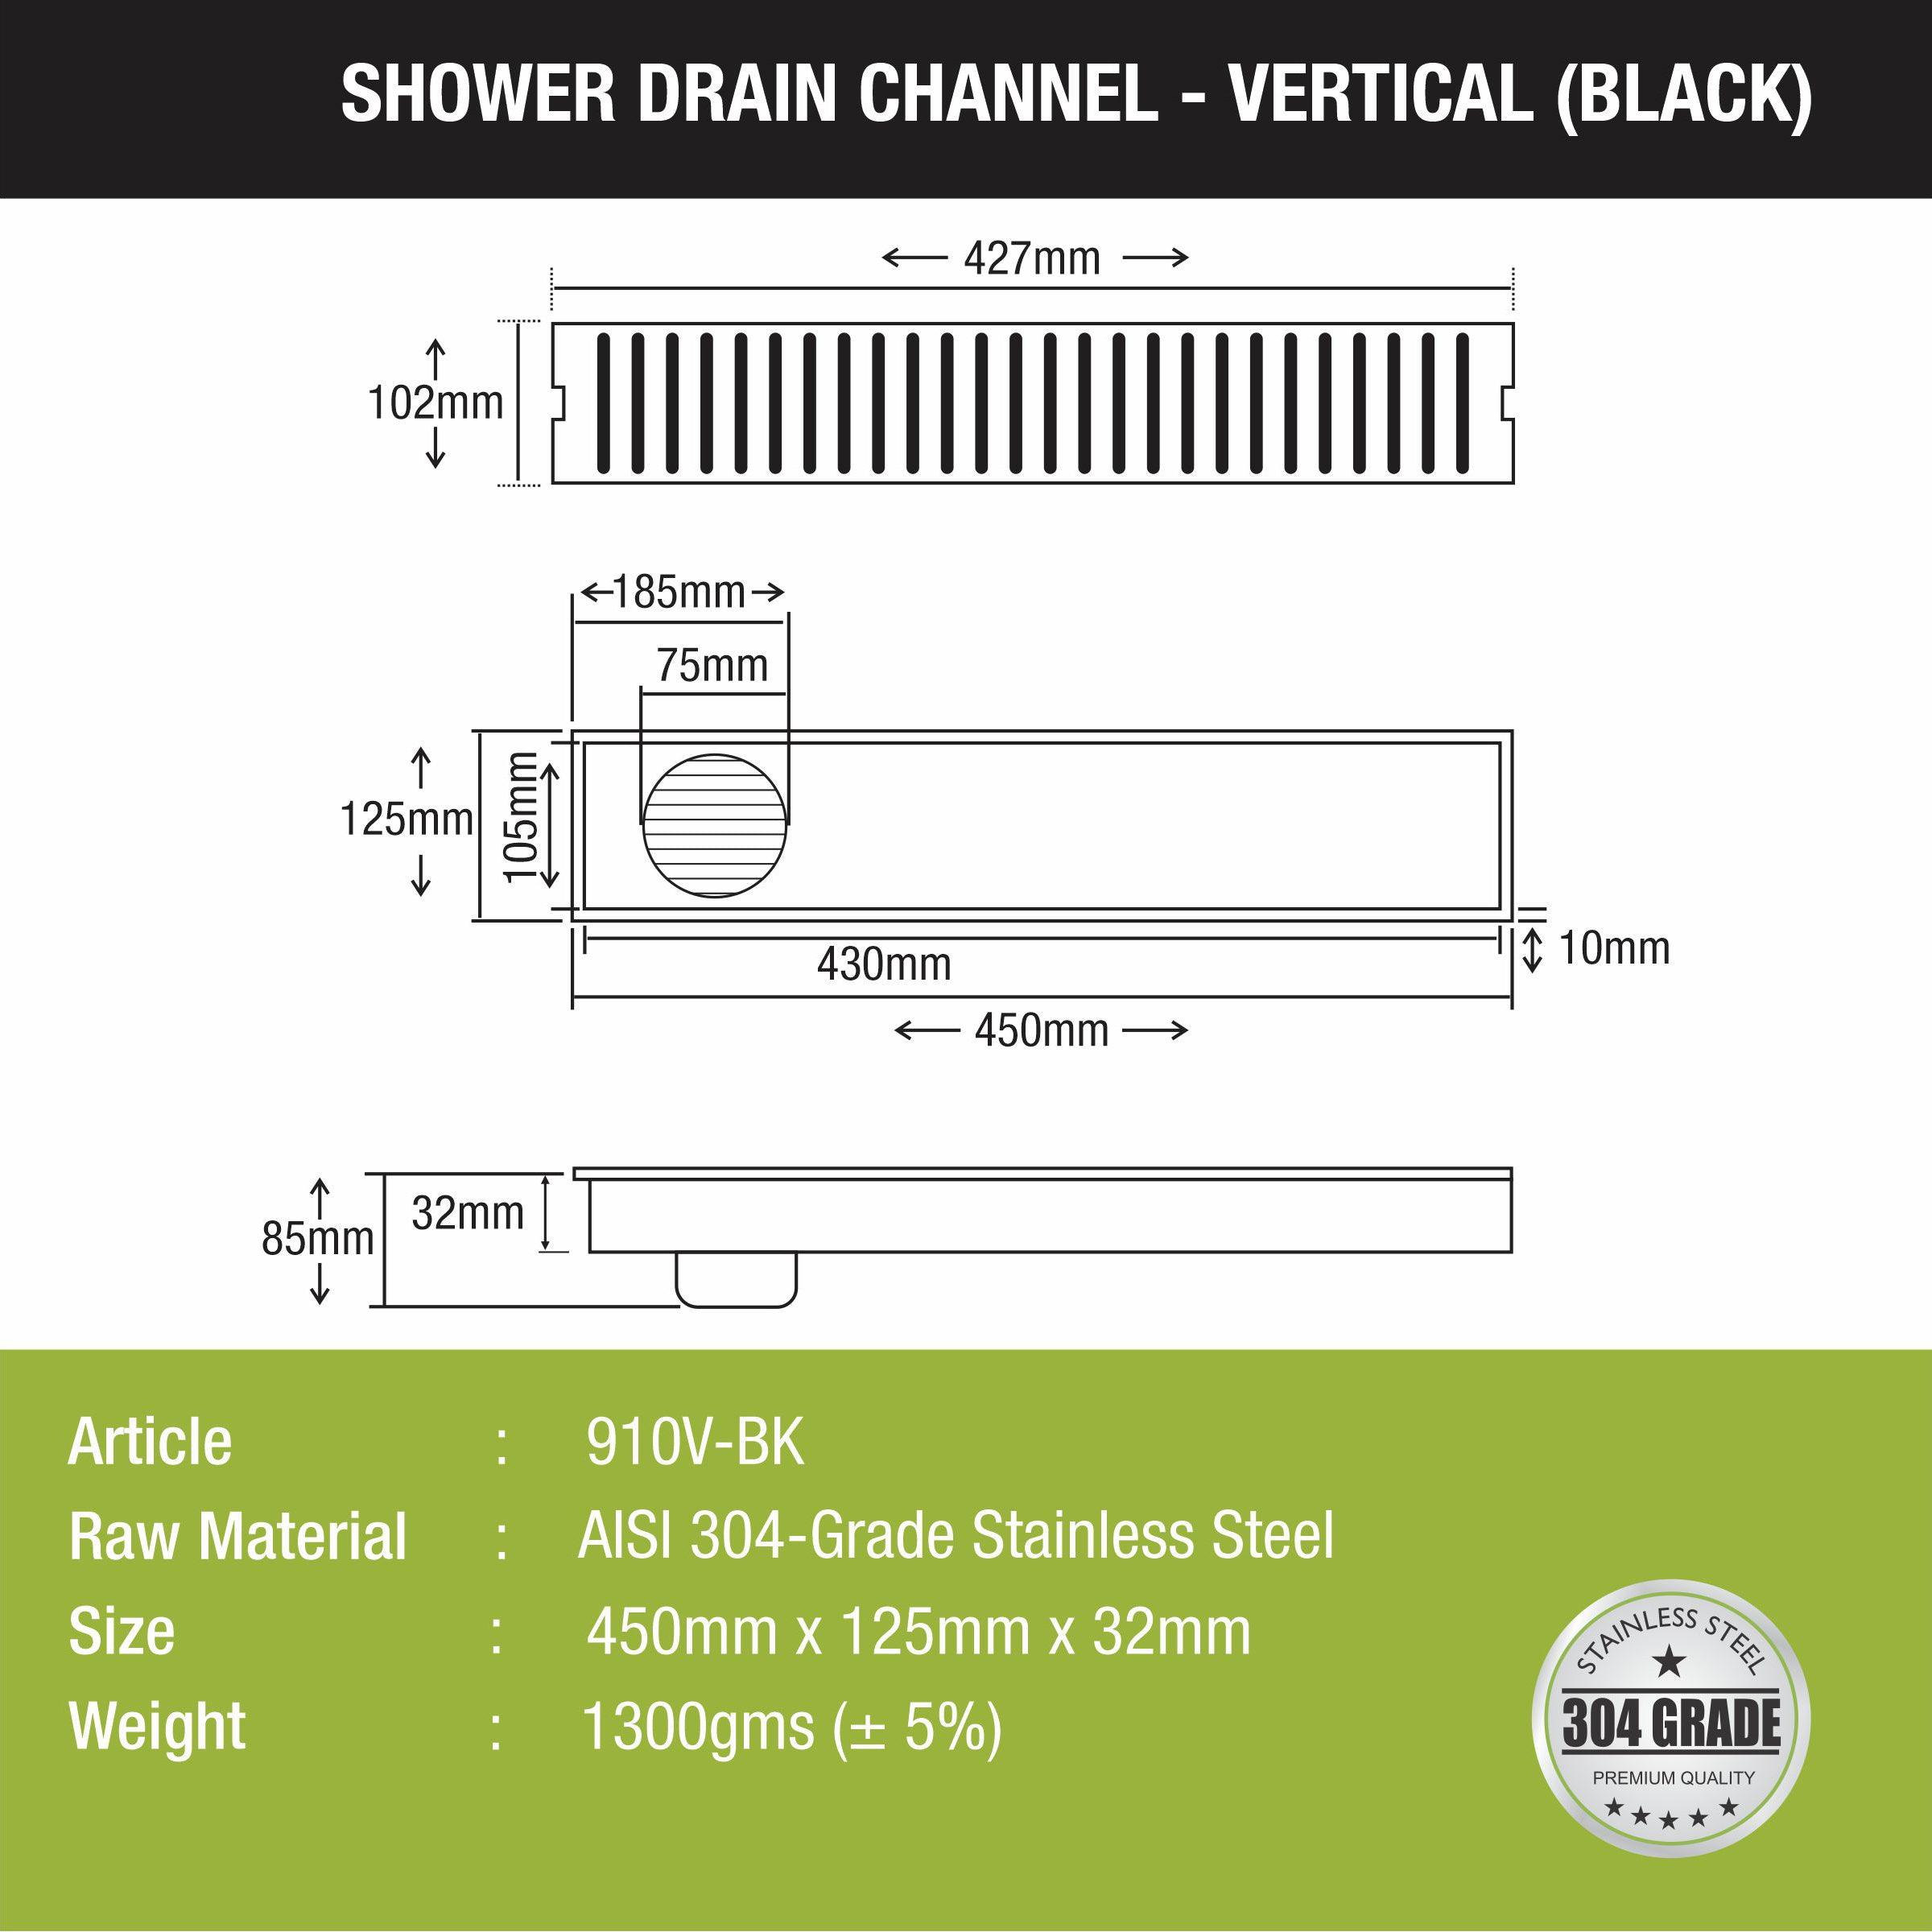 Vertical Shower Drain Channel - Black (18 x 5 Inches) size and measurement